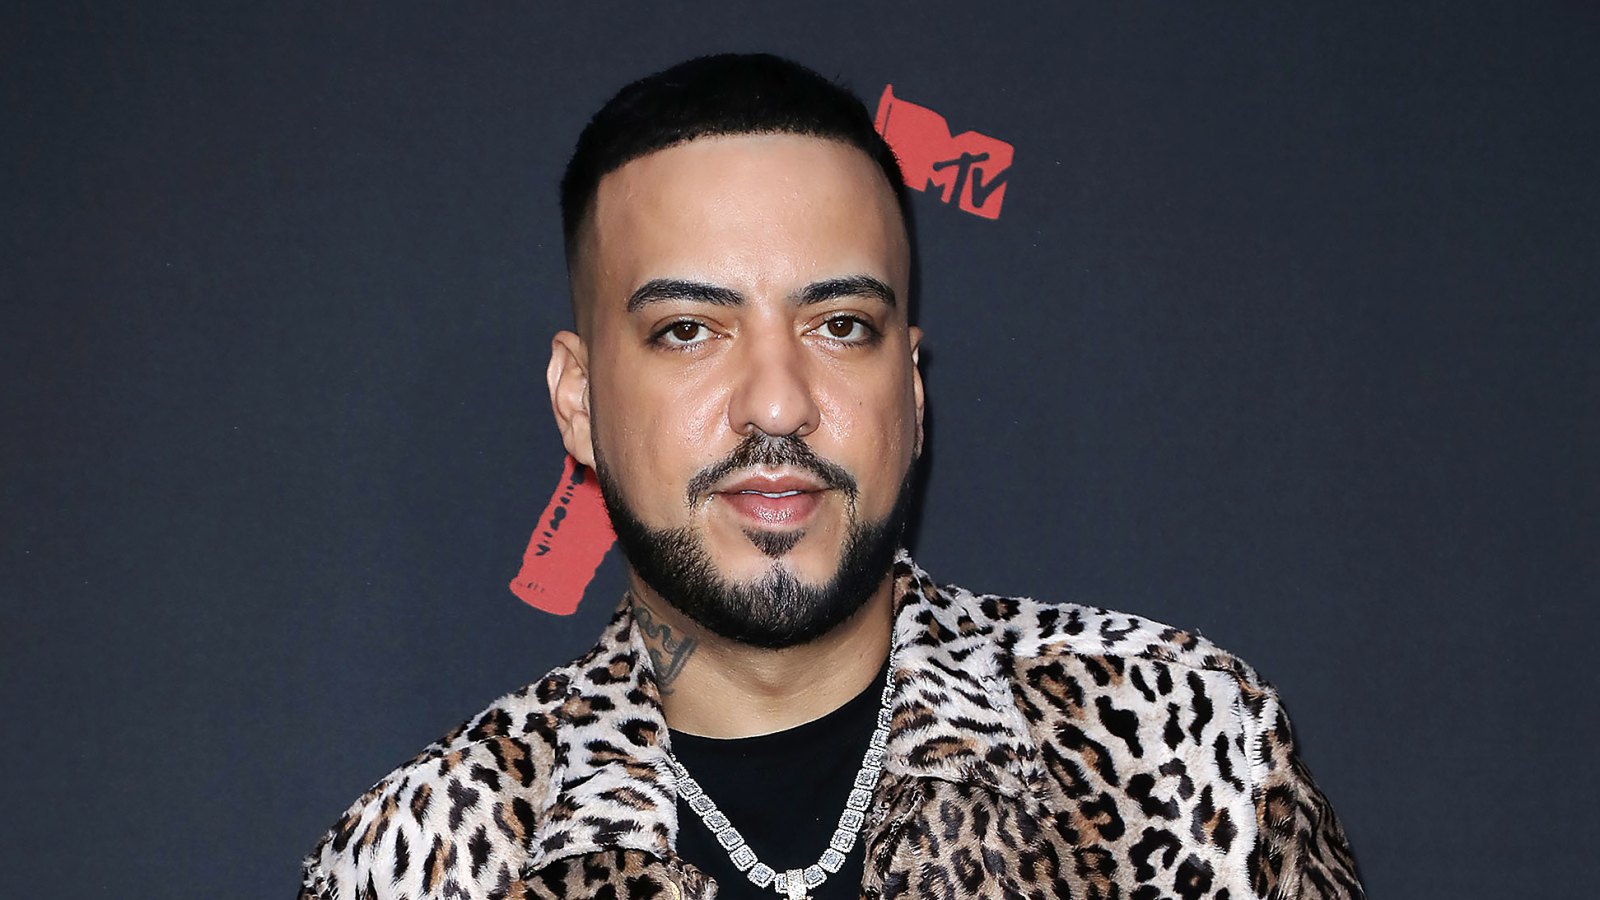 French Montana Accused of Sexually Assaulting Intoxicated Woman in Lawsuit